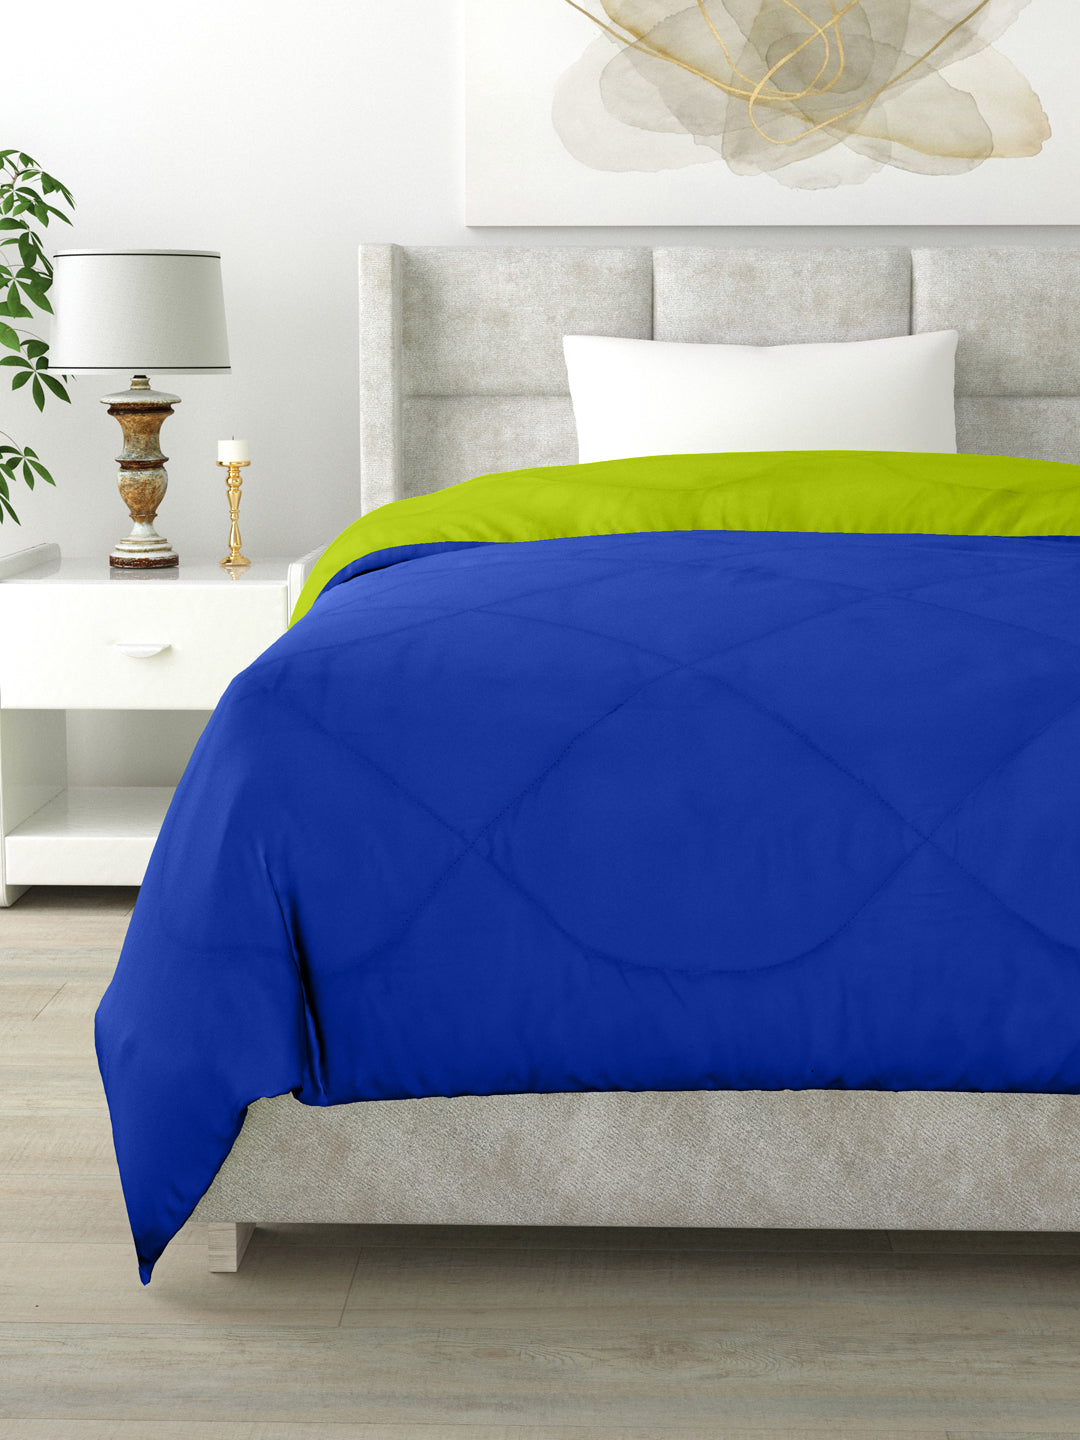 Reversible Single Bed Comforter 200 GSM 60x90 Inches (Blue & Green)